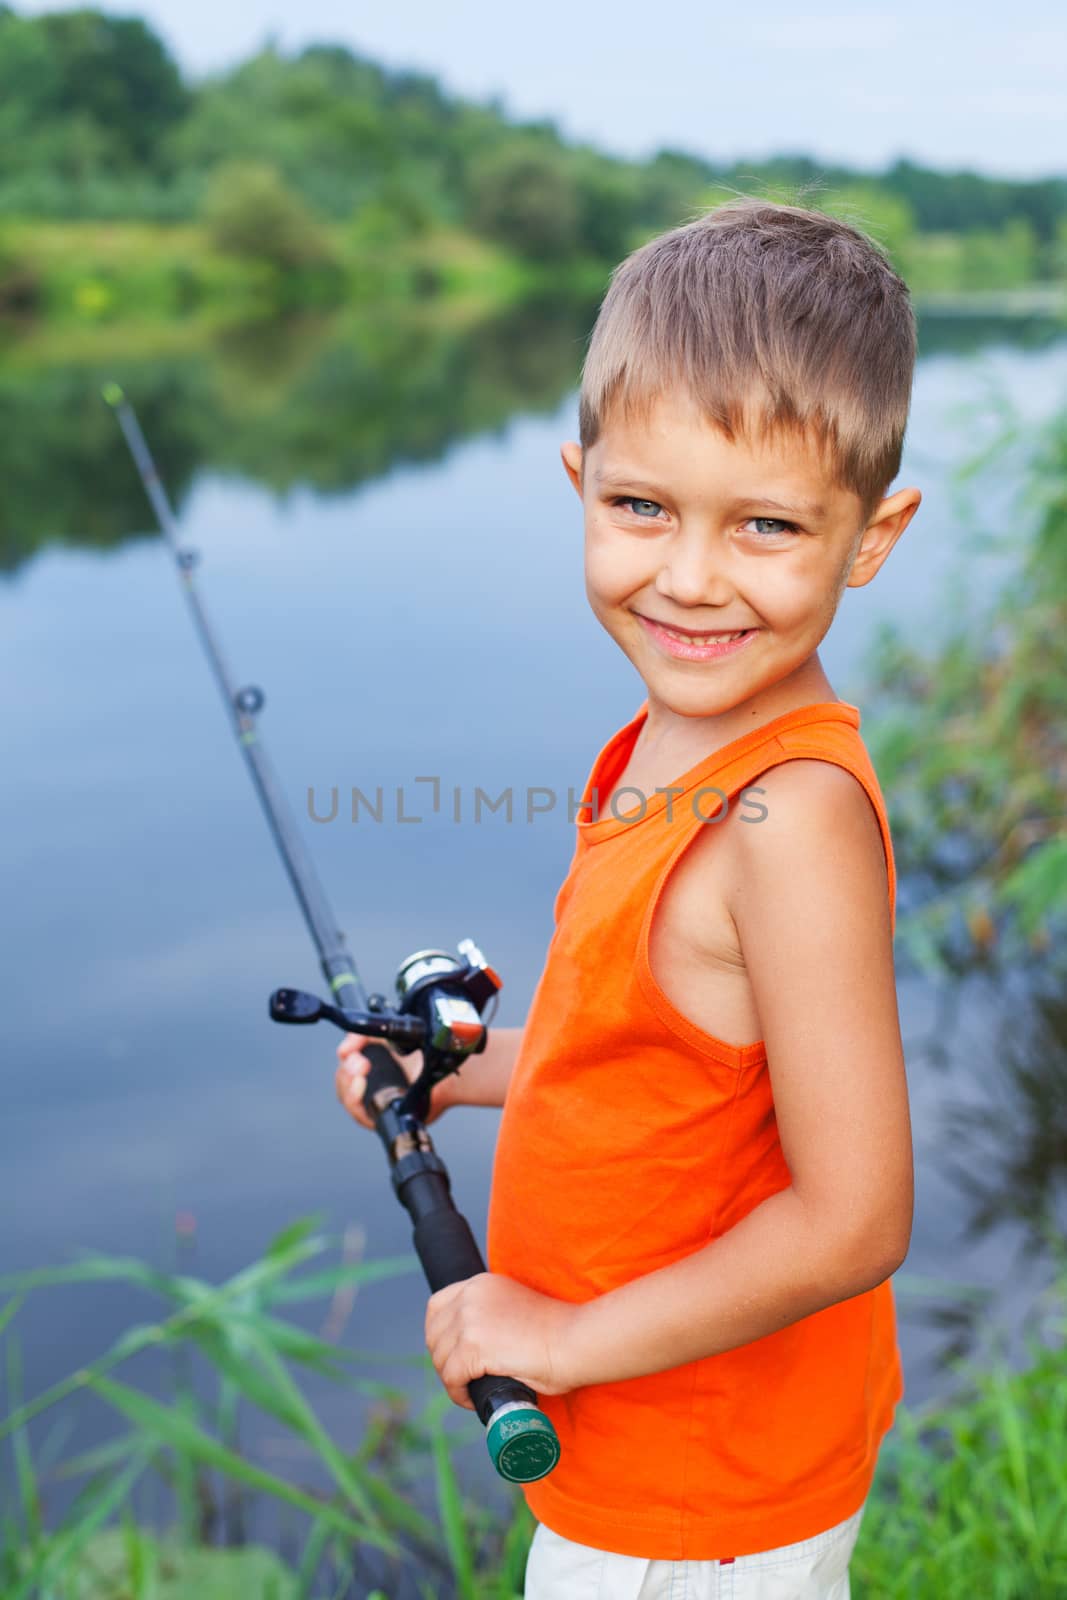 Summer vacation - Photo of little boy fishing on the river.